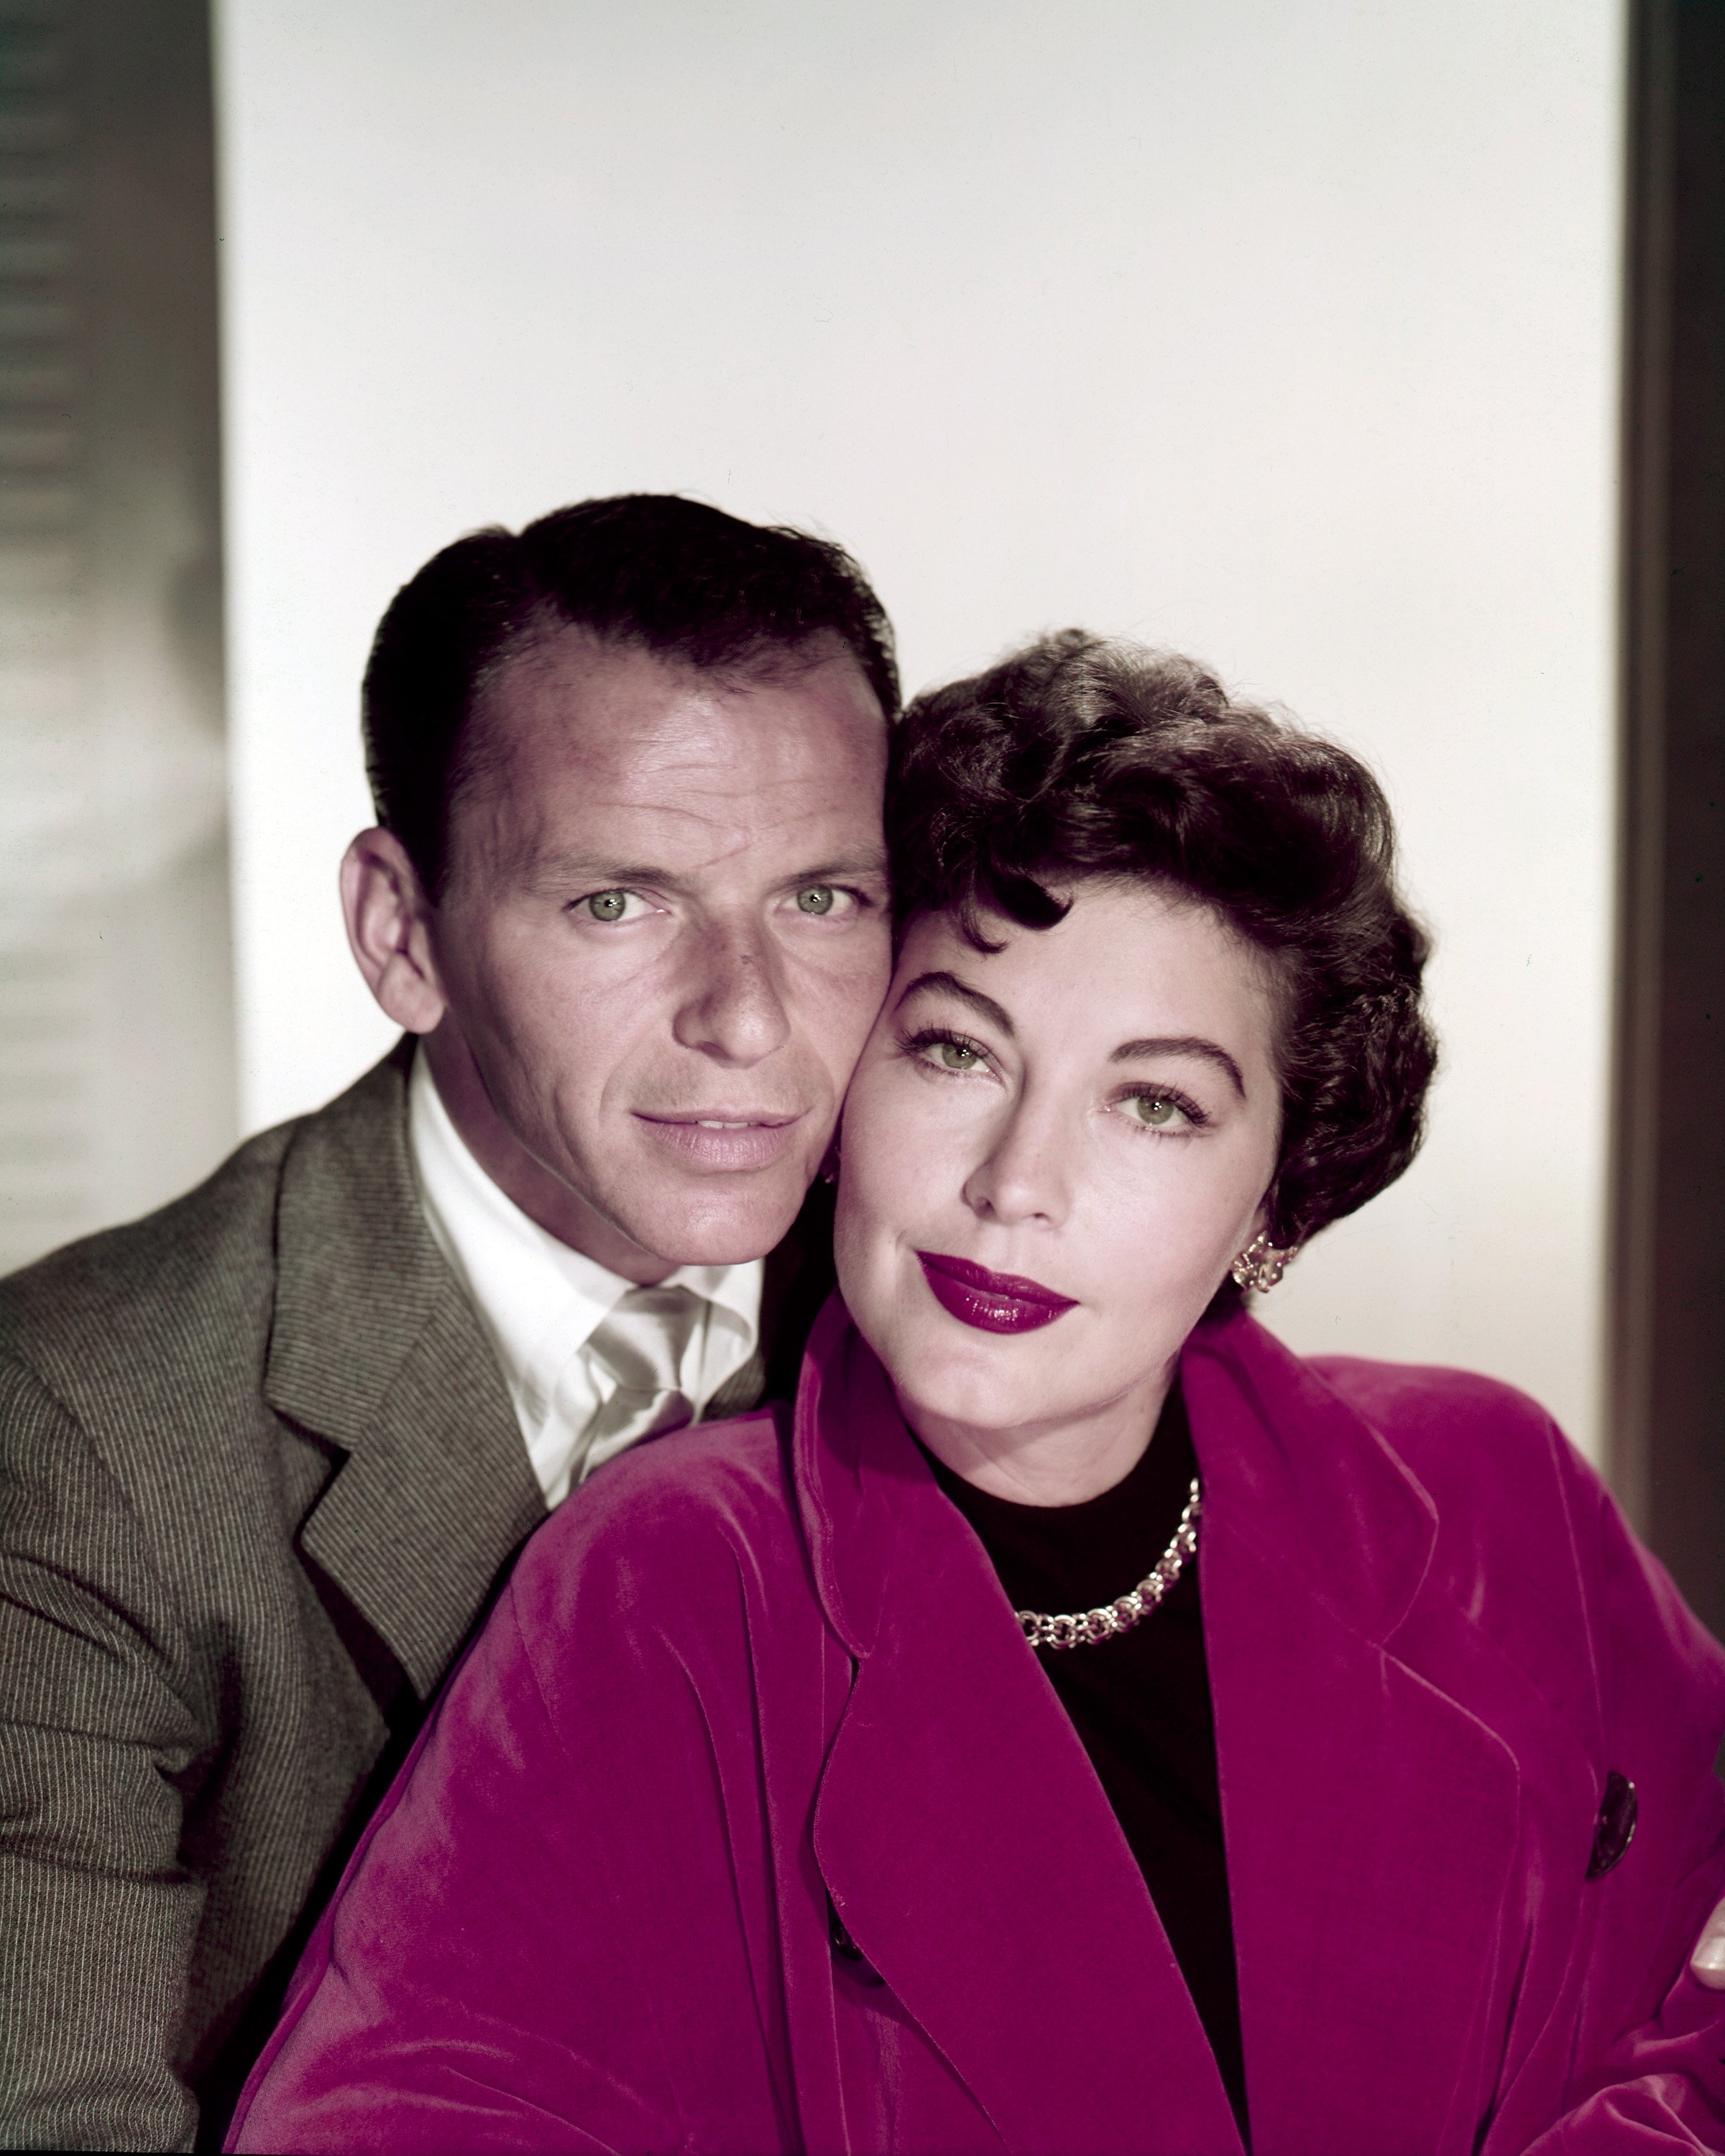 American actors and singers Frank Sinatra (1915 - 1998) and Ava Gardner (1922 - 1990), circa 1953 | Photo: Getty Images